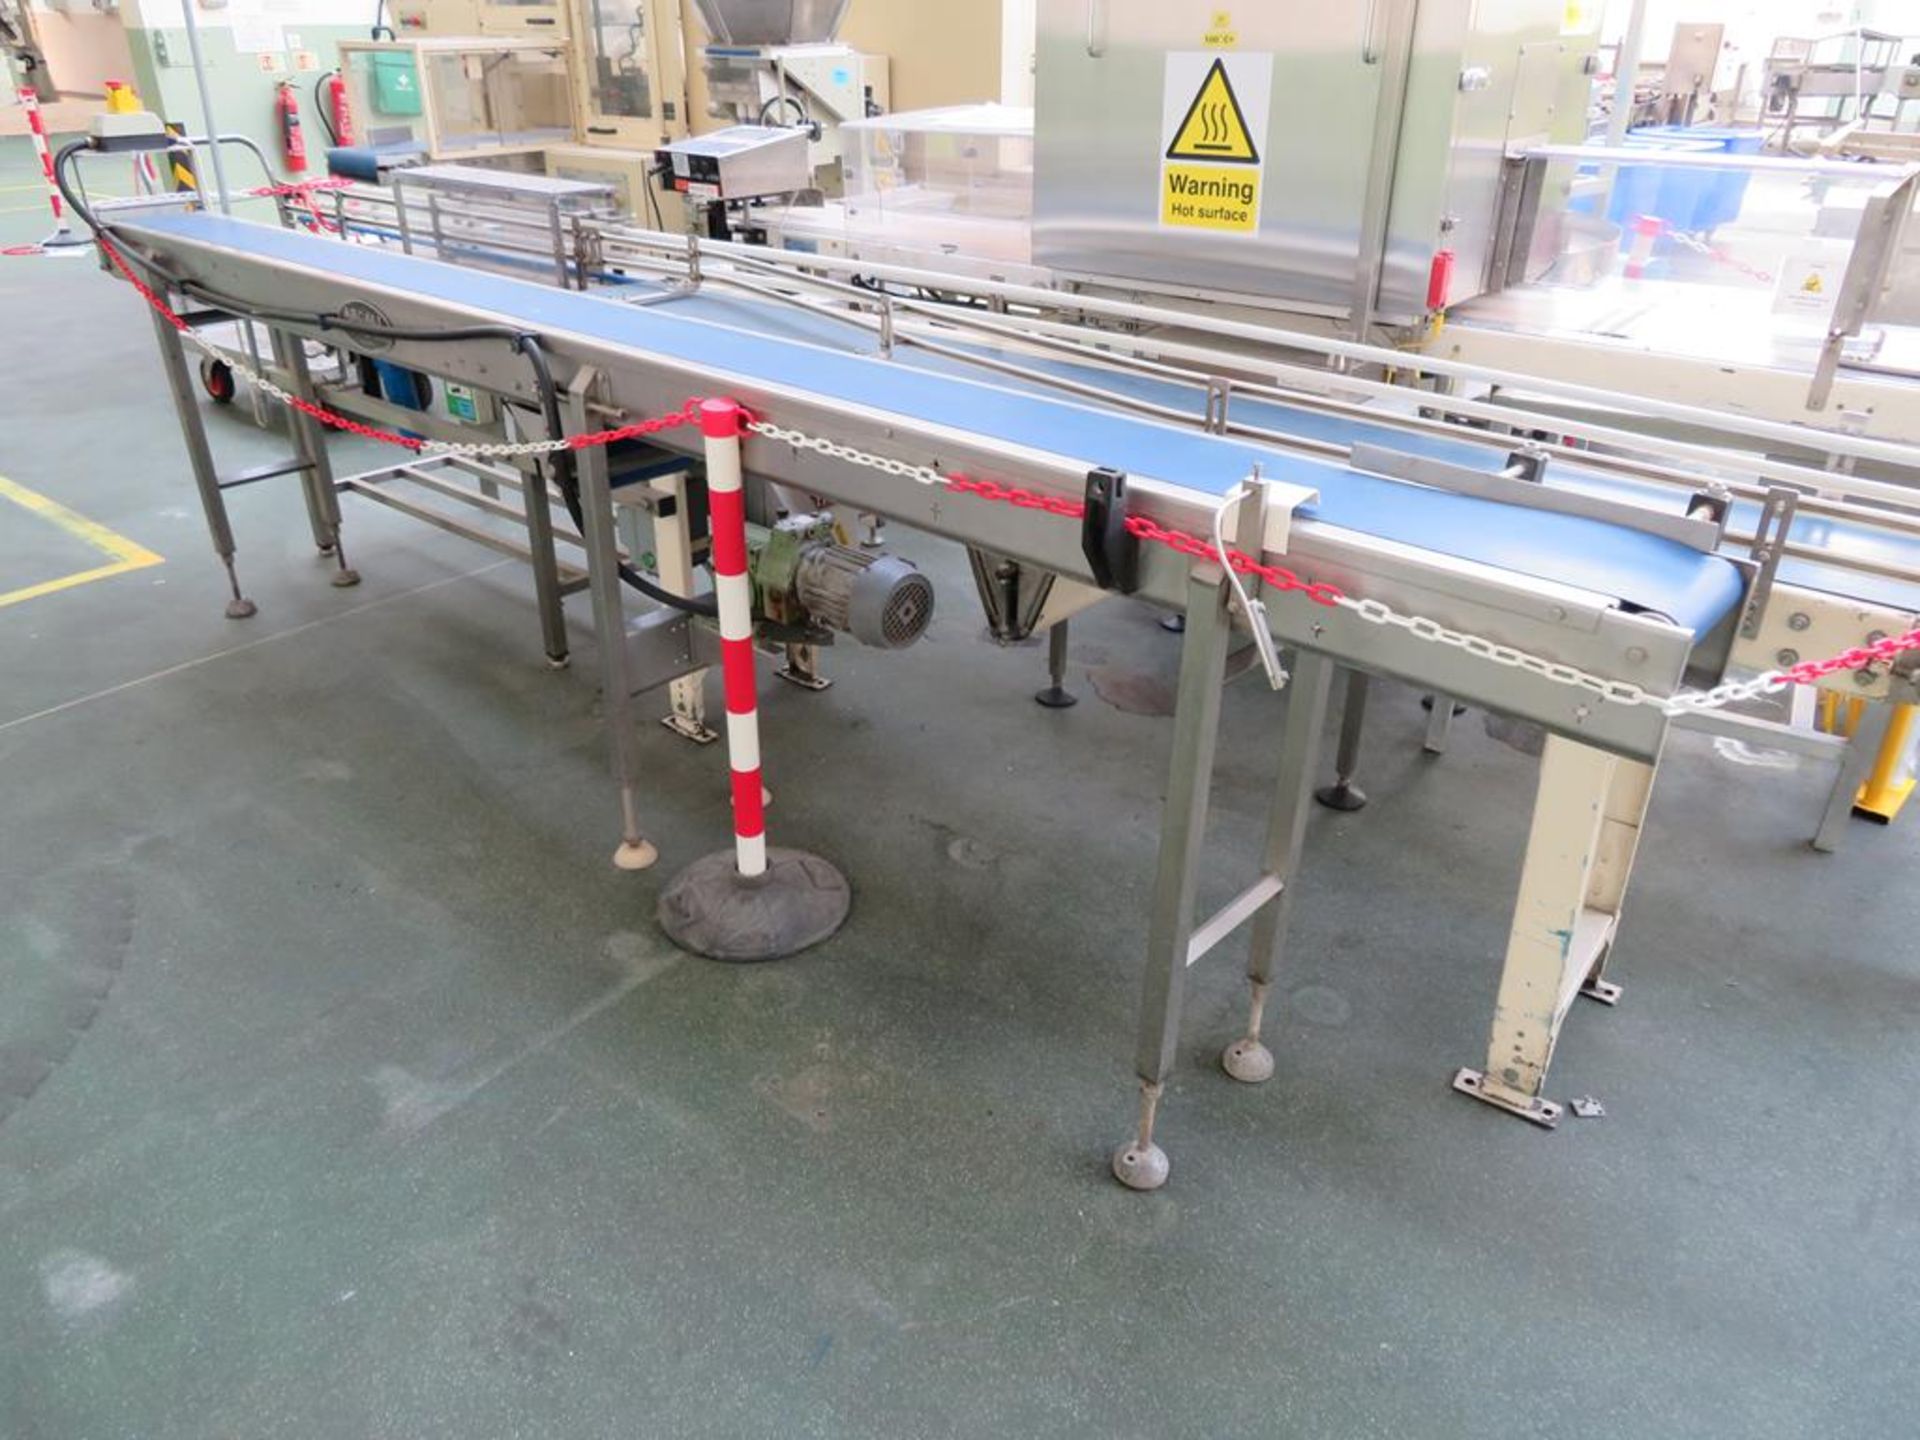 Mobile Lazy Susan (dia 1.25m), Stainless Steel Bench with Pneumatic Press and 2 x Belt Conveyors (3.